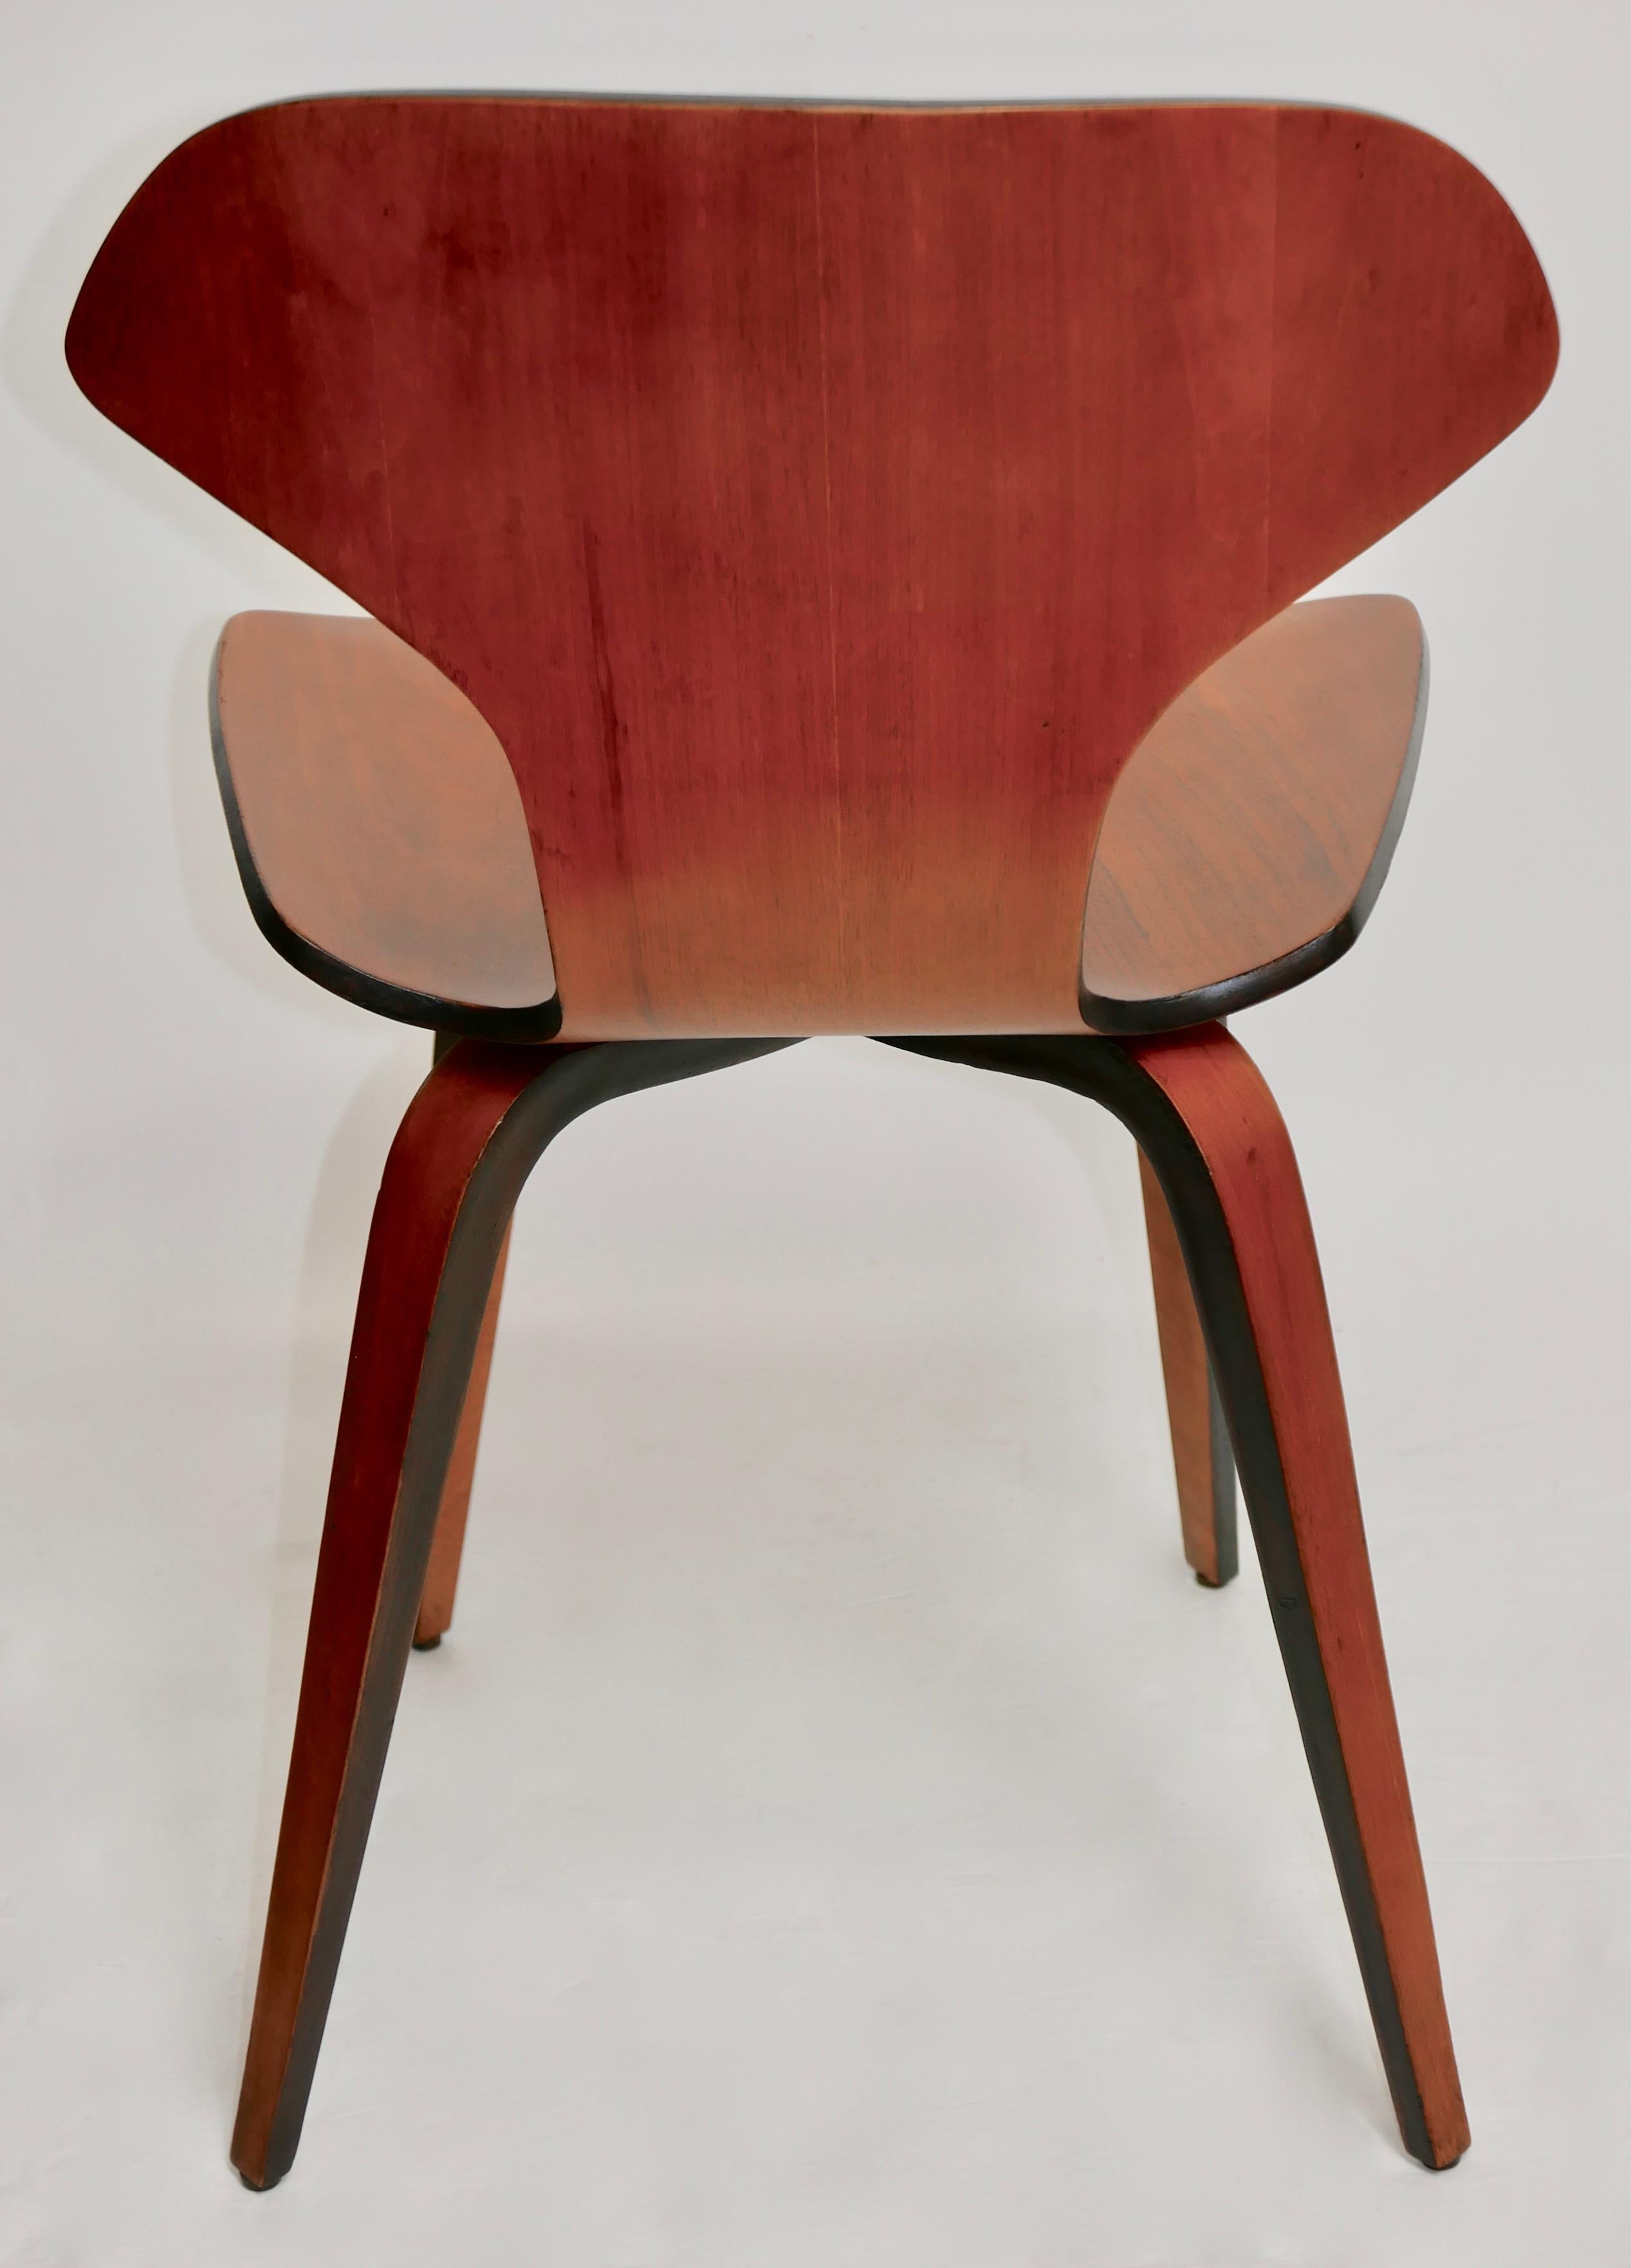 Mid-20th Century Pair of Mid-Century Modern George Mulhauser Plywood Side Chairs by Plycraft